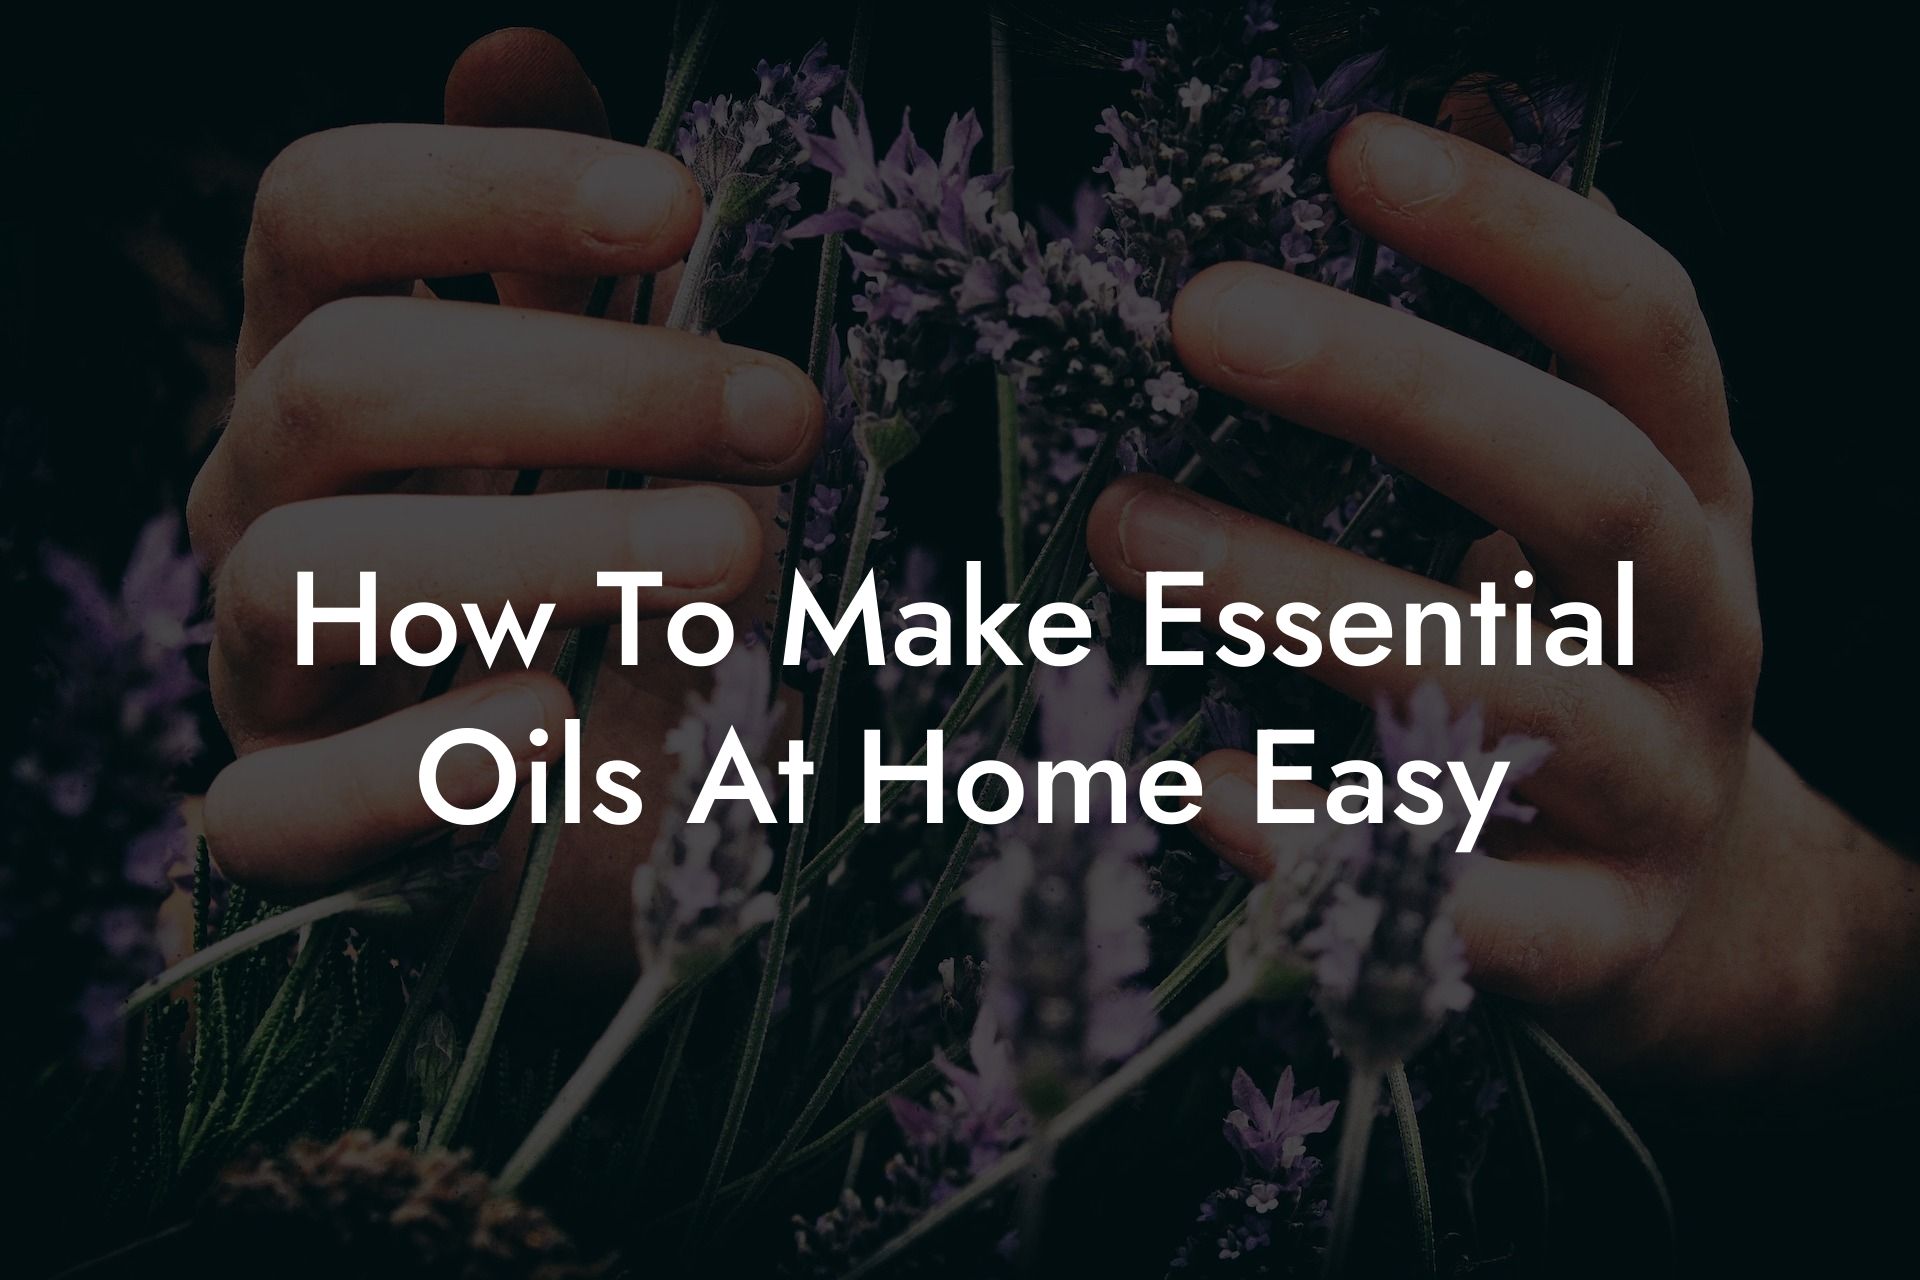 How To Make Essential Oils At Home Easy